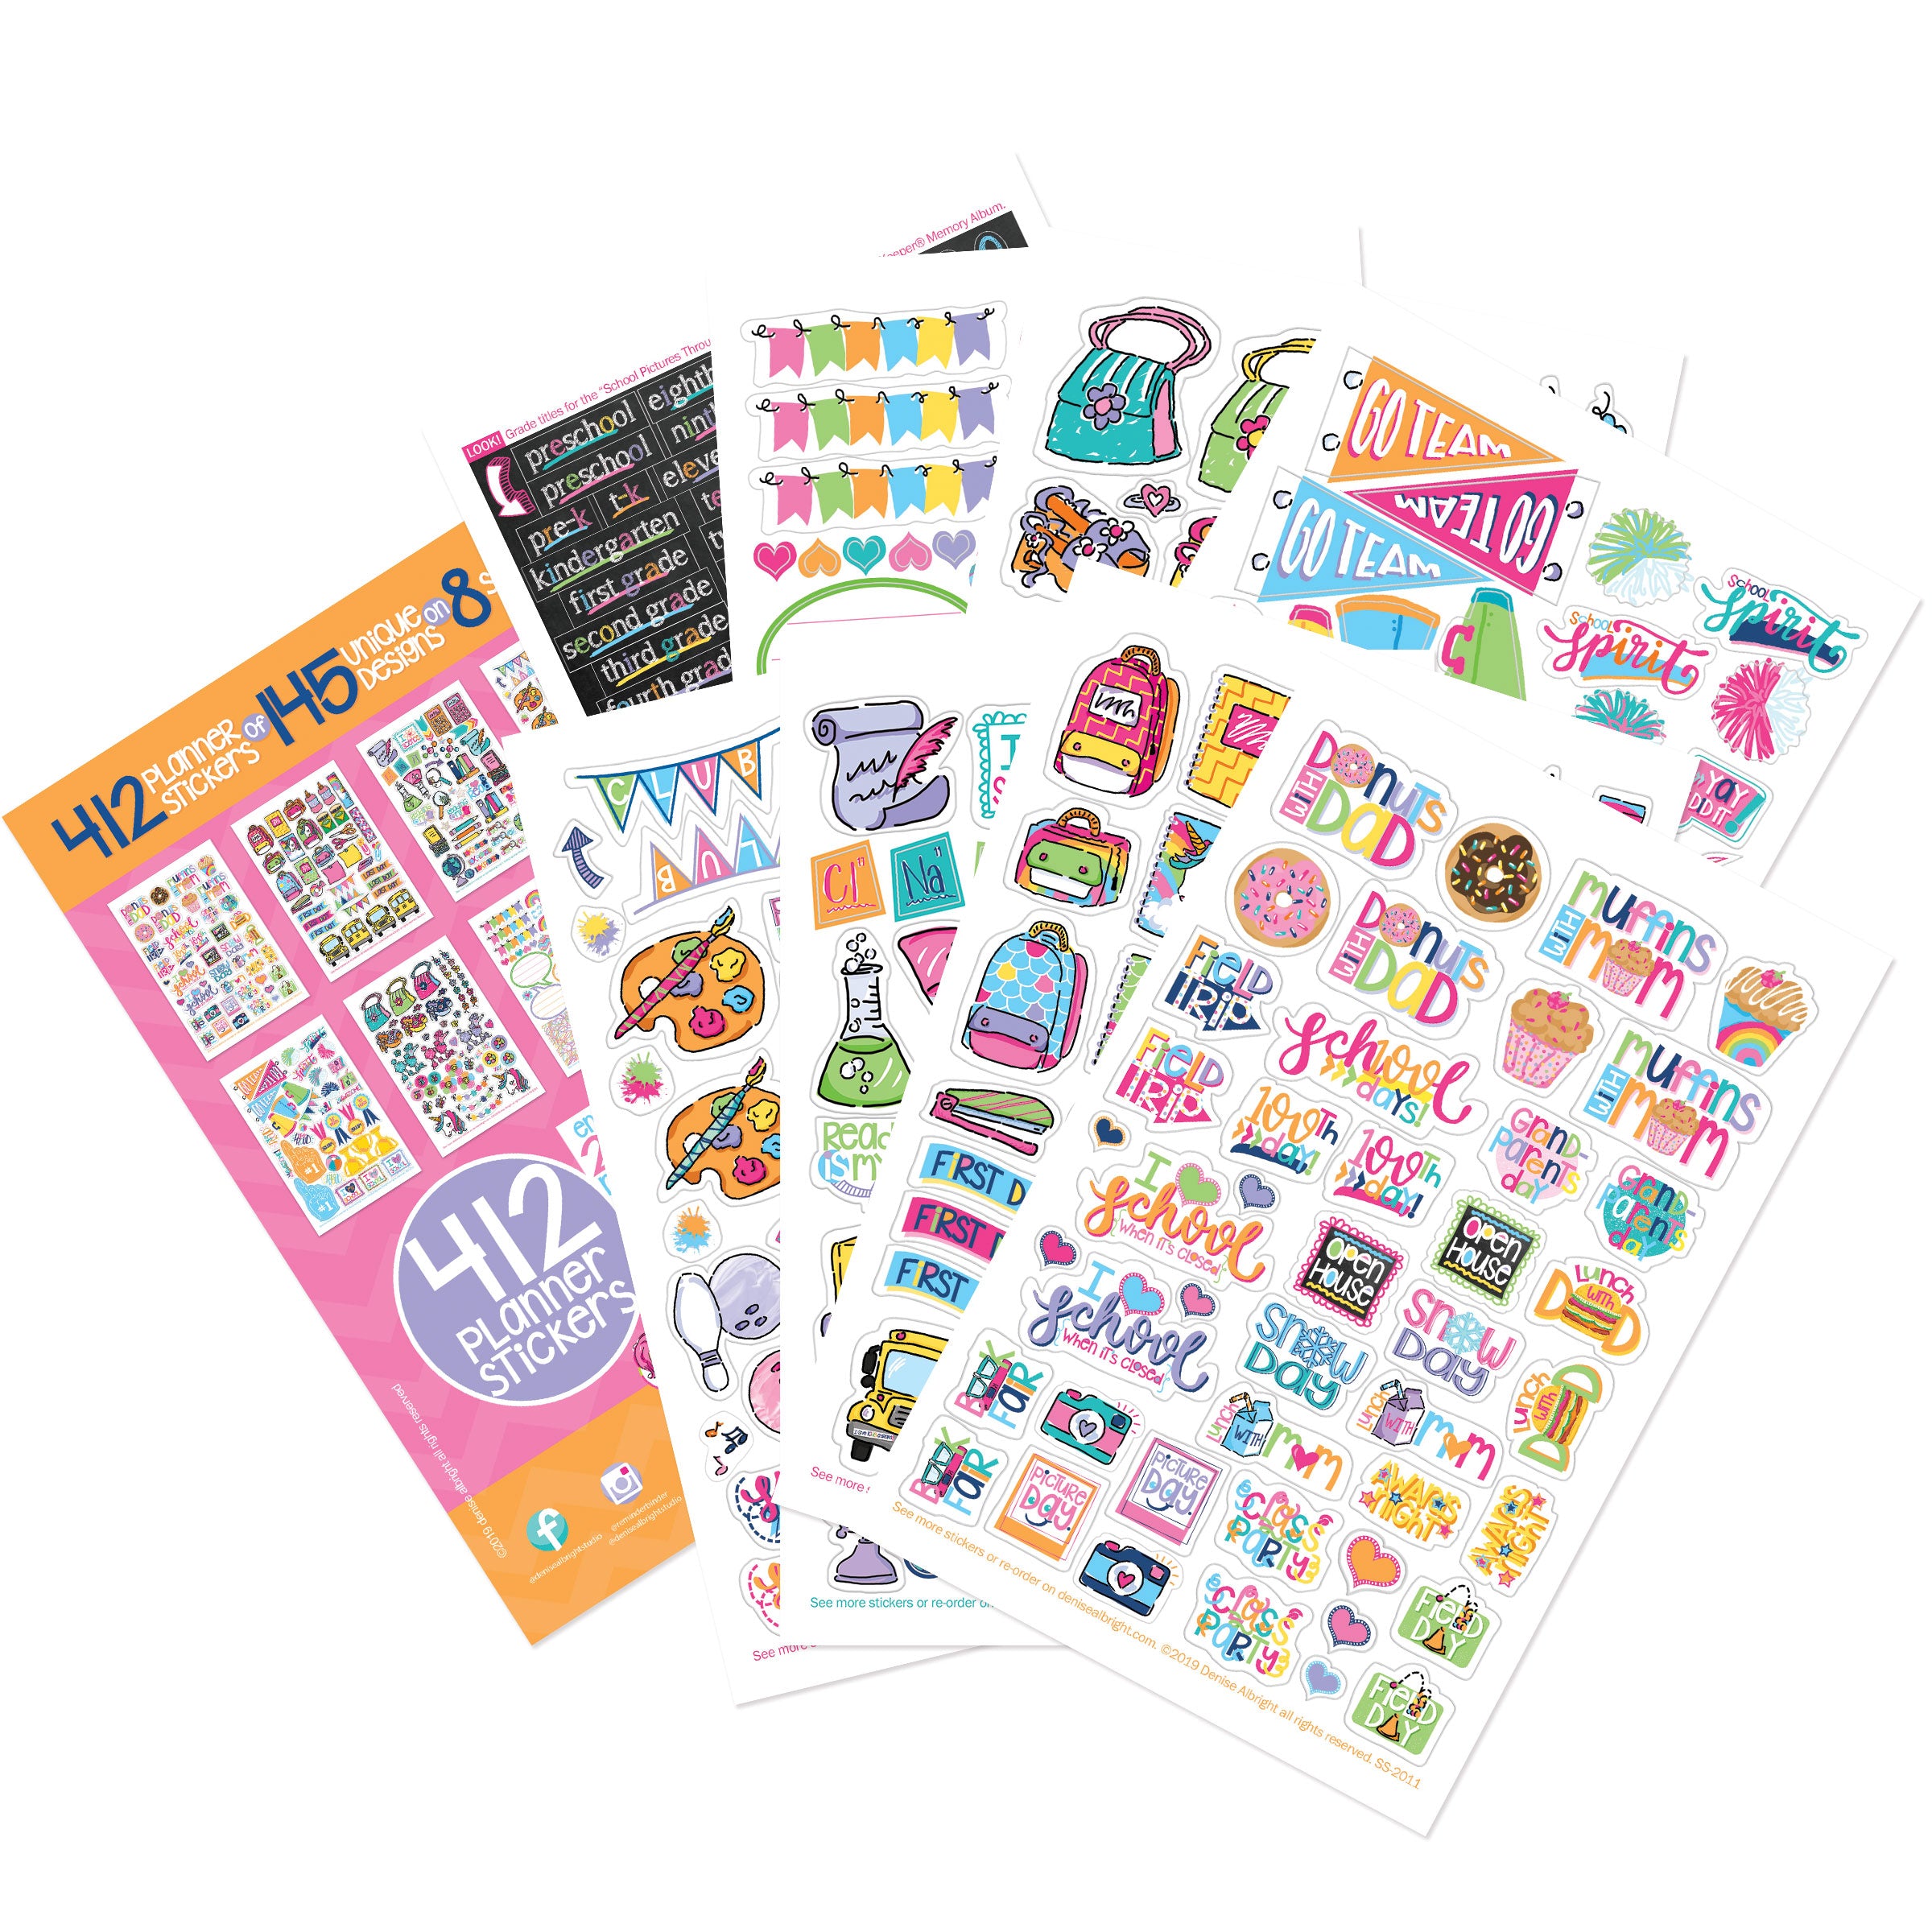 Small Primary Colored Dot Sticker Bulk Package - InStock Labels